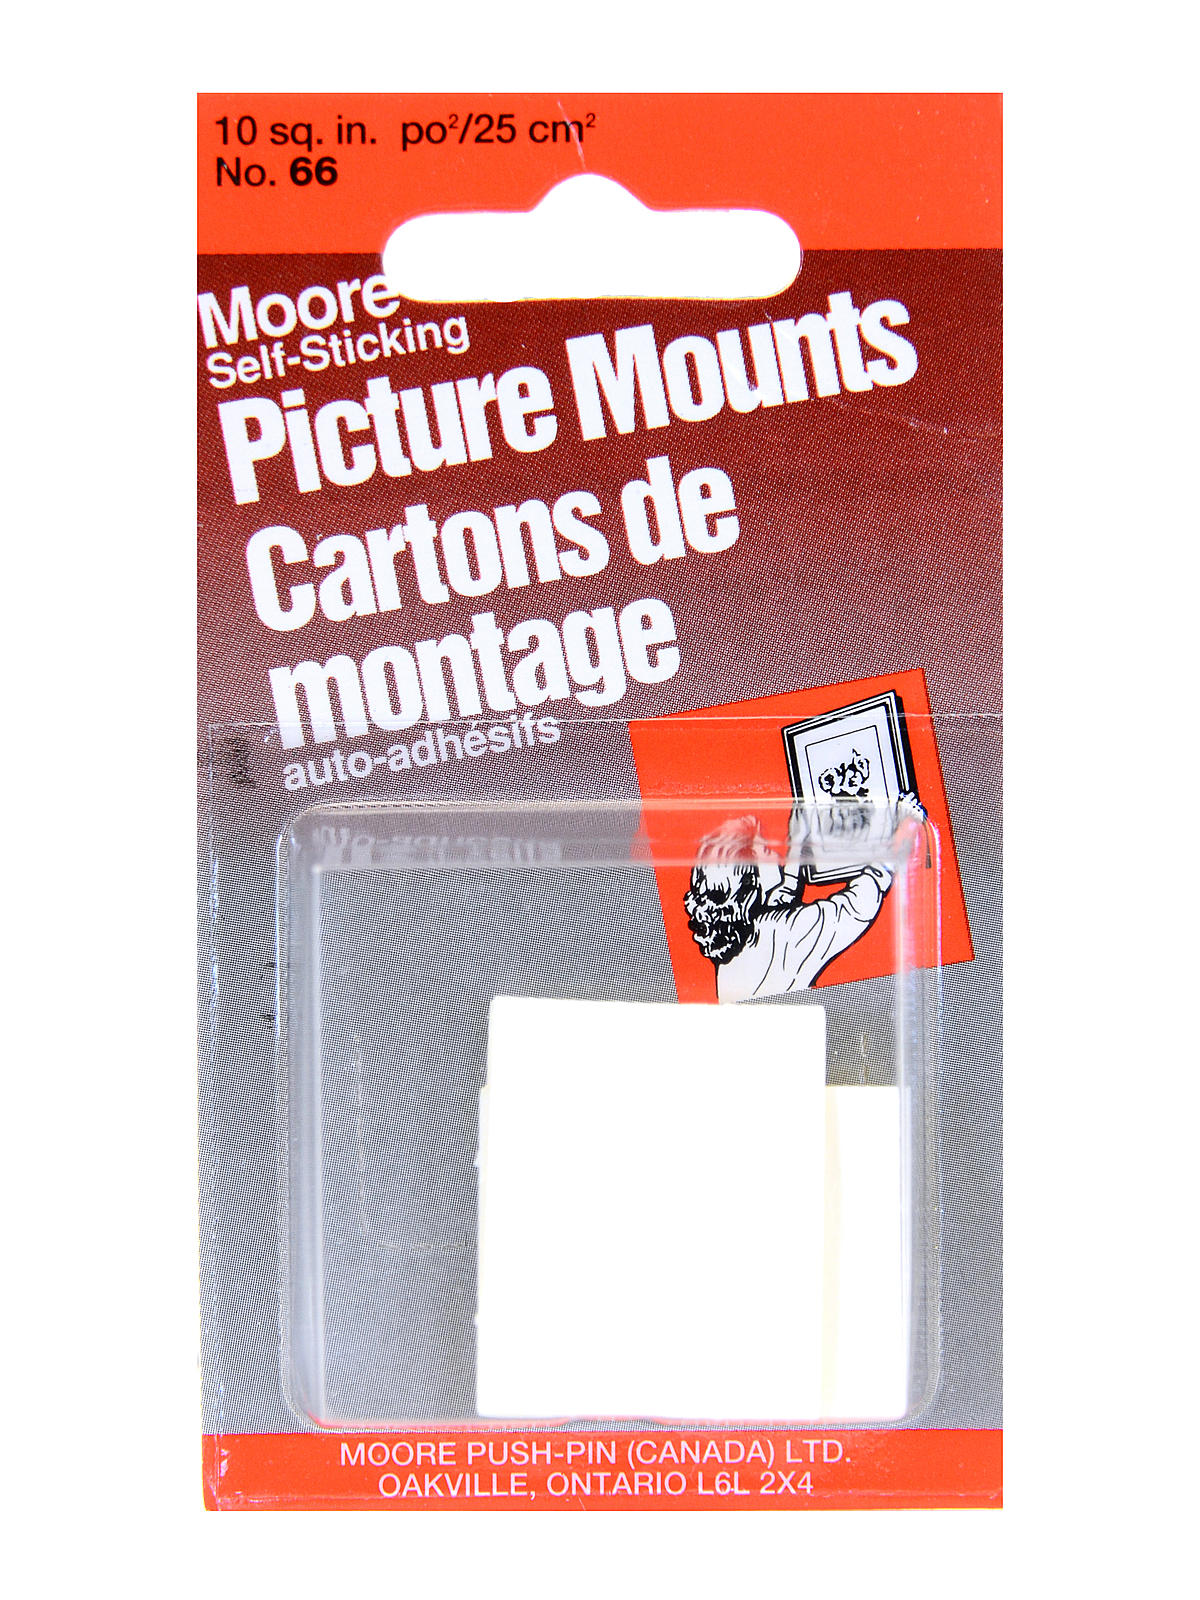 Self-sticking Picture Mount 1 In. X 1 1 4 In. Pack Of 8